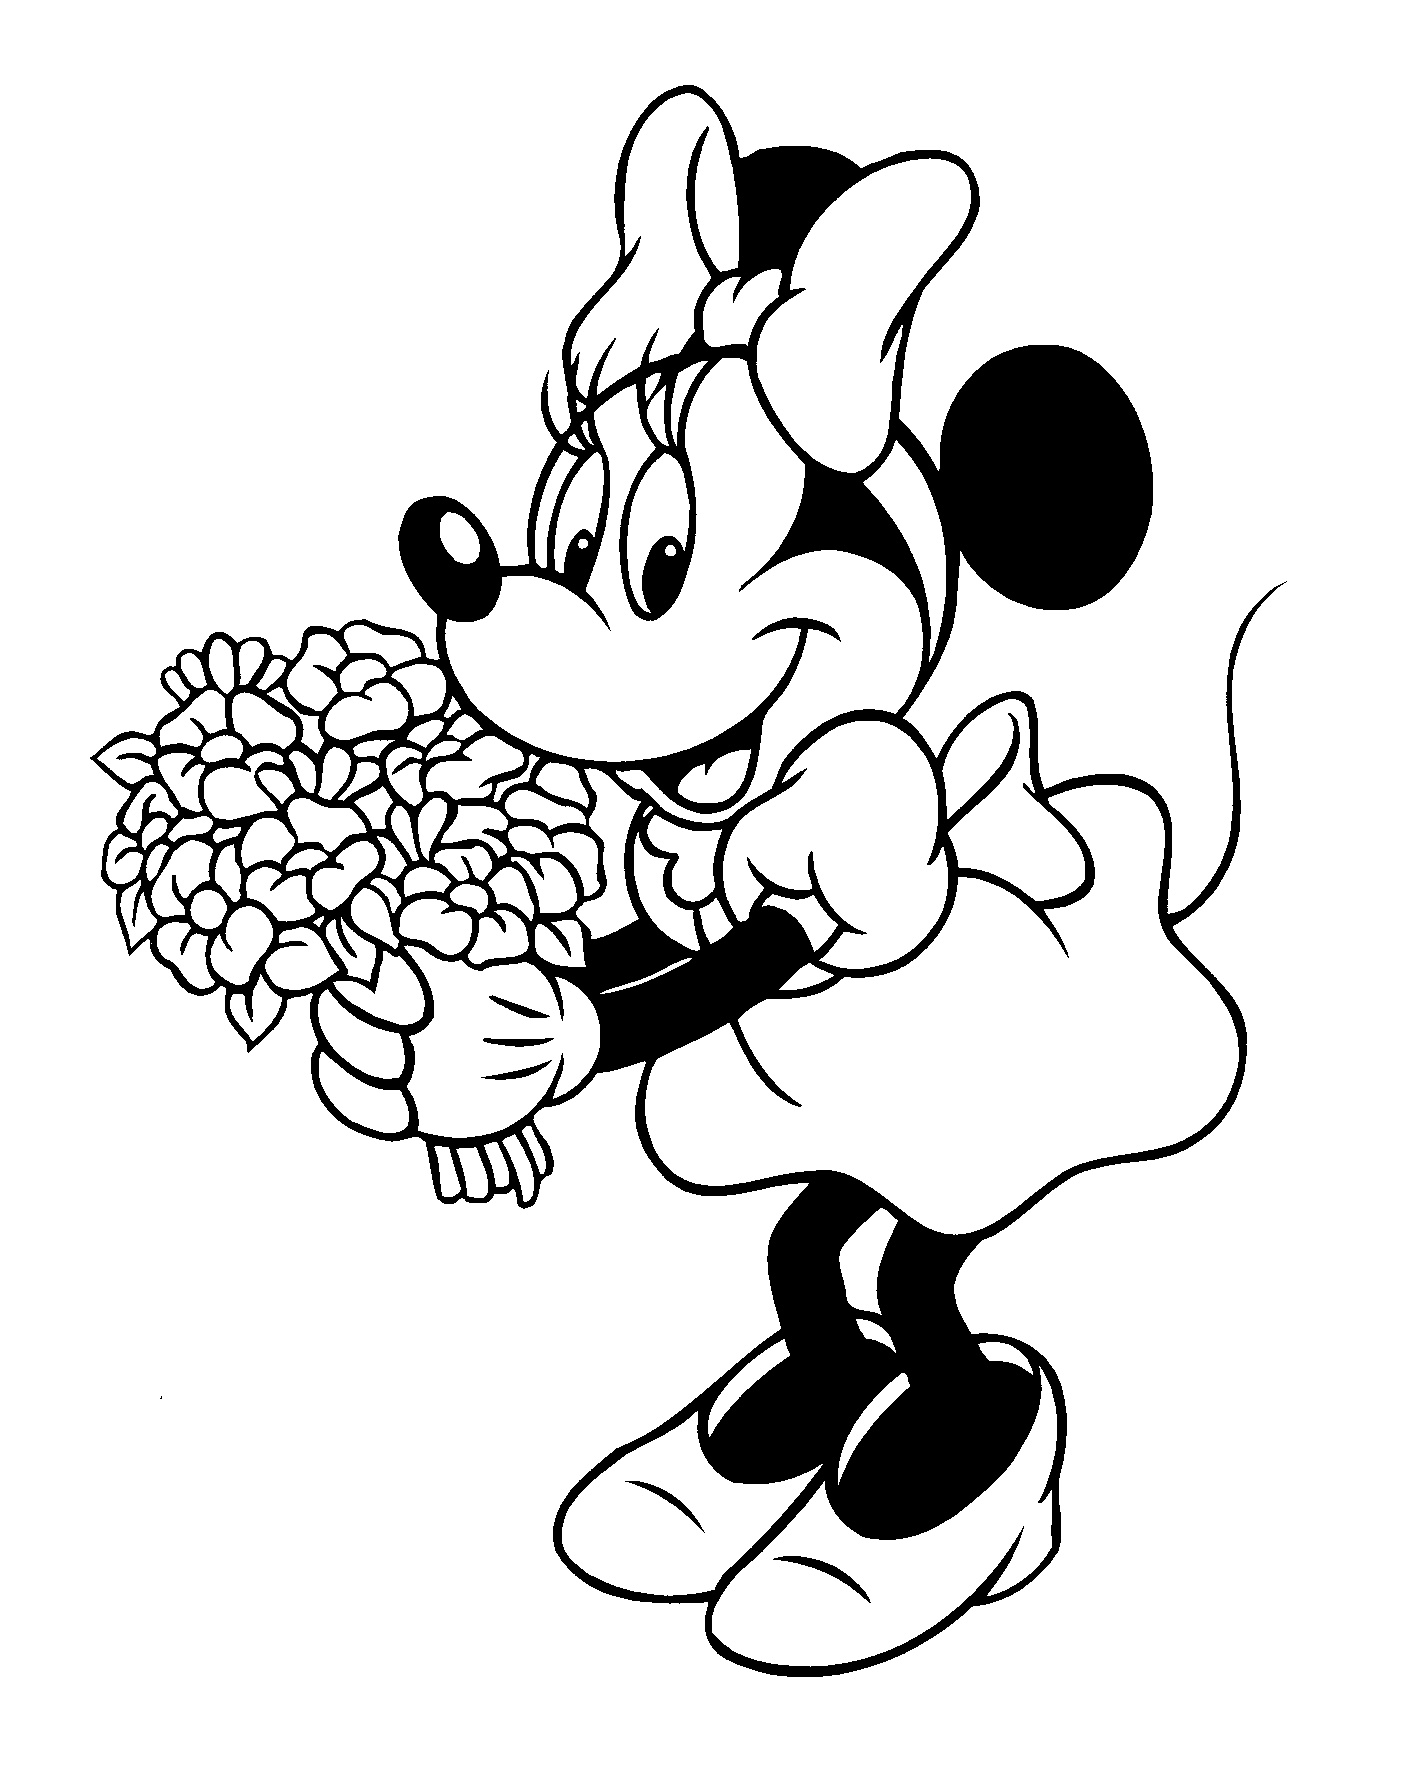 image=minnie Coloring for kids minnie 2